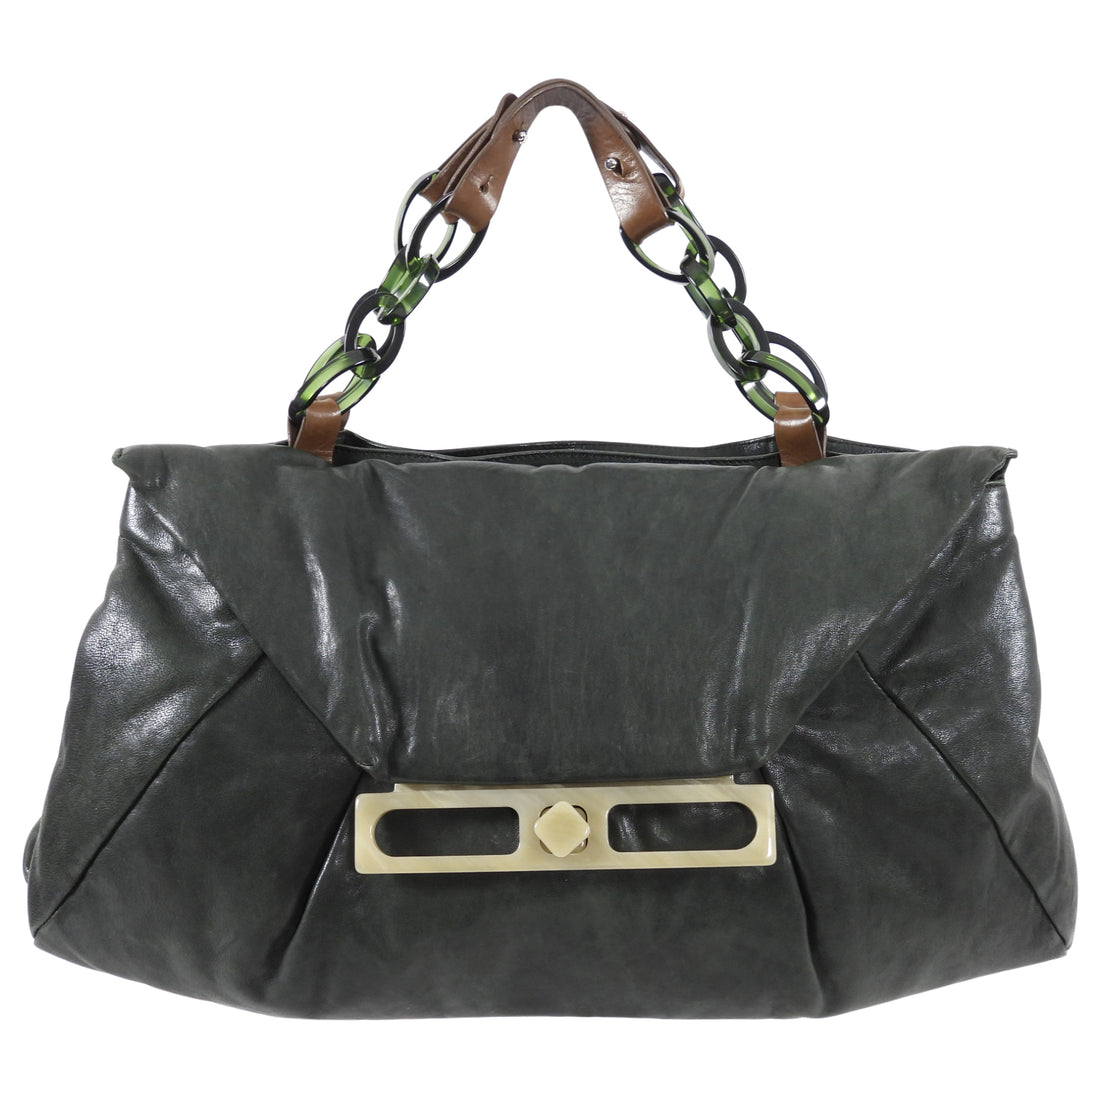 Marni - Black grained leather bag with green bakelite handle for women